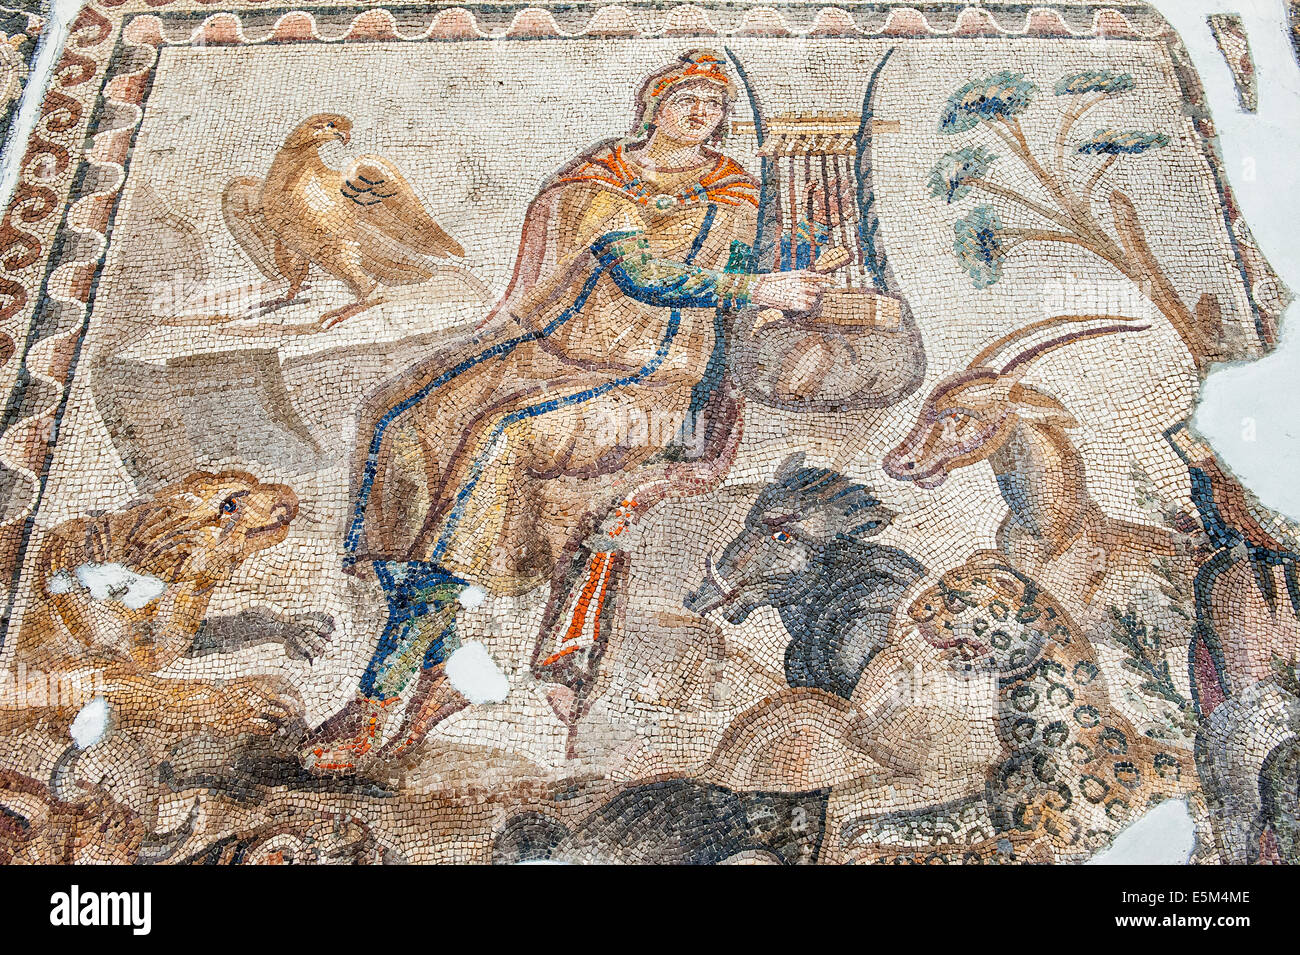 Orpheus playing a cithara surrounded by animals, Mosaic from Tarsus, 3rd Cent A.C., Hatay Archaeology Museum, Antioch, Turkey Stock Photo